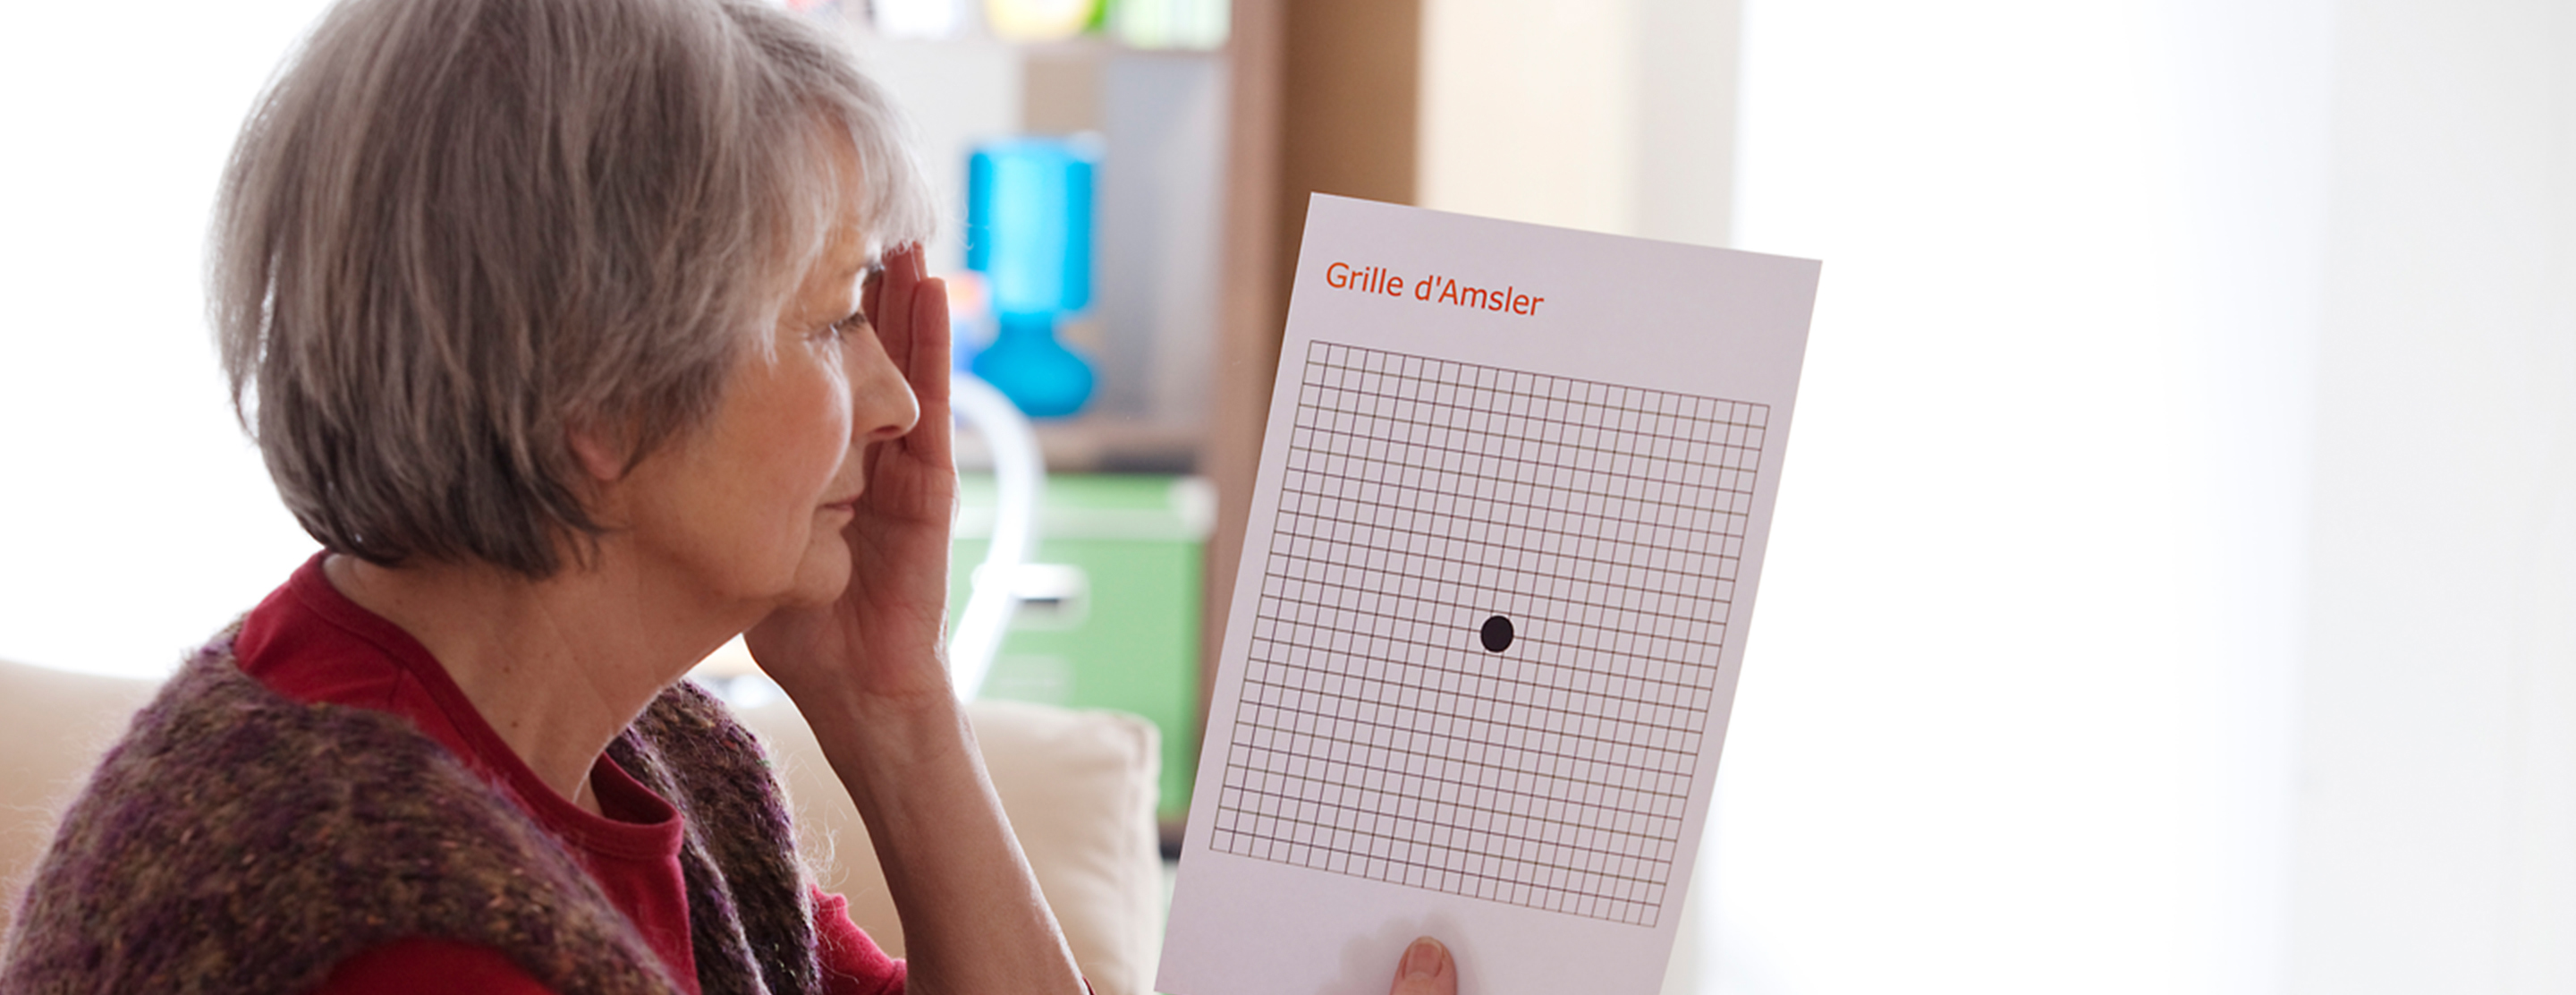 Macular Degeneration Grid: Check Your Vision with an Amsler Grid